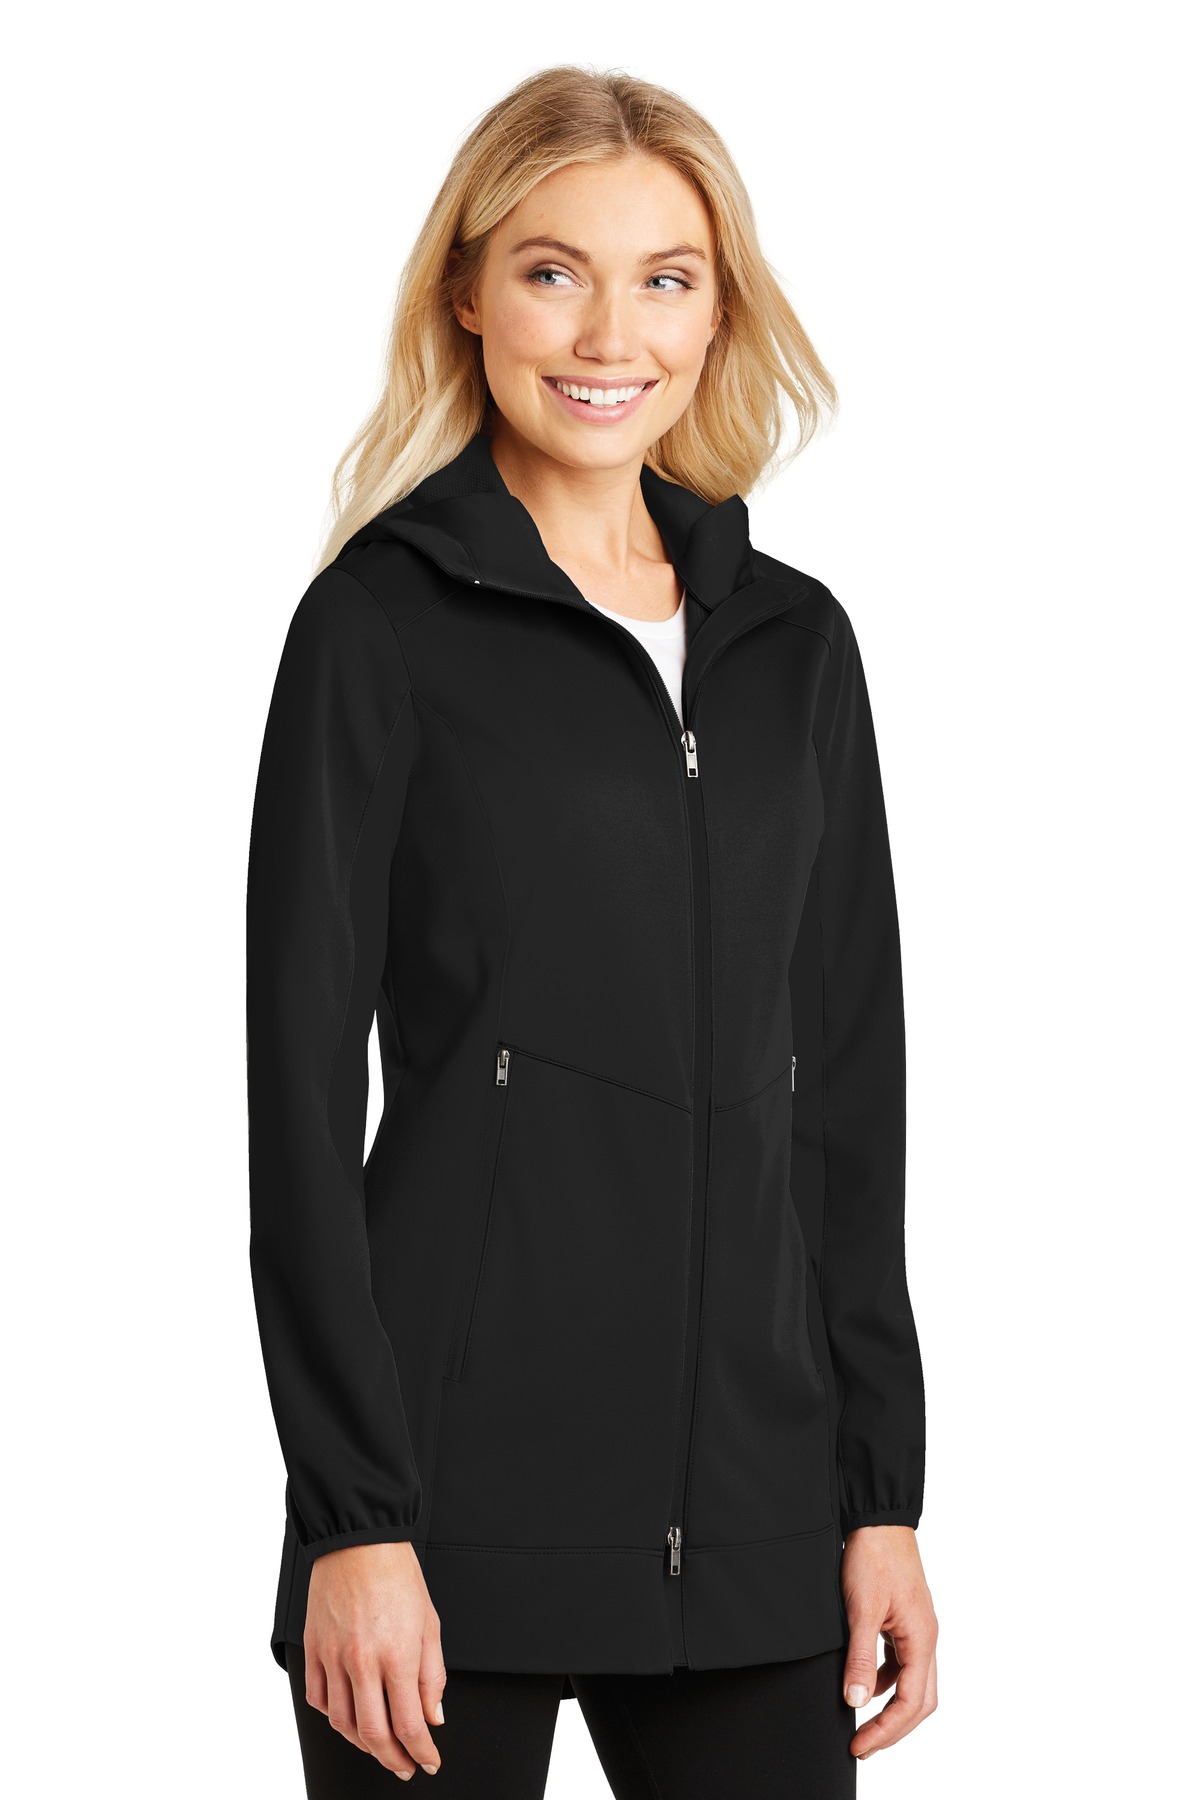 Port Authority Ladies Active Hooded Soft Shell Jacket-XS (Deep Black) - image 4 of 6